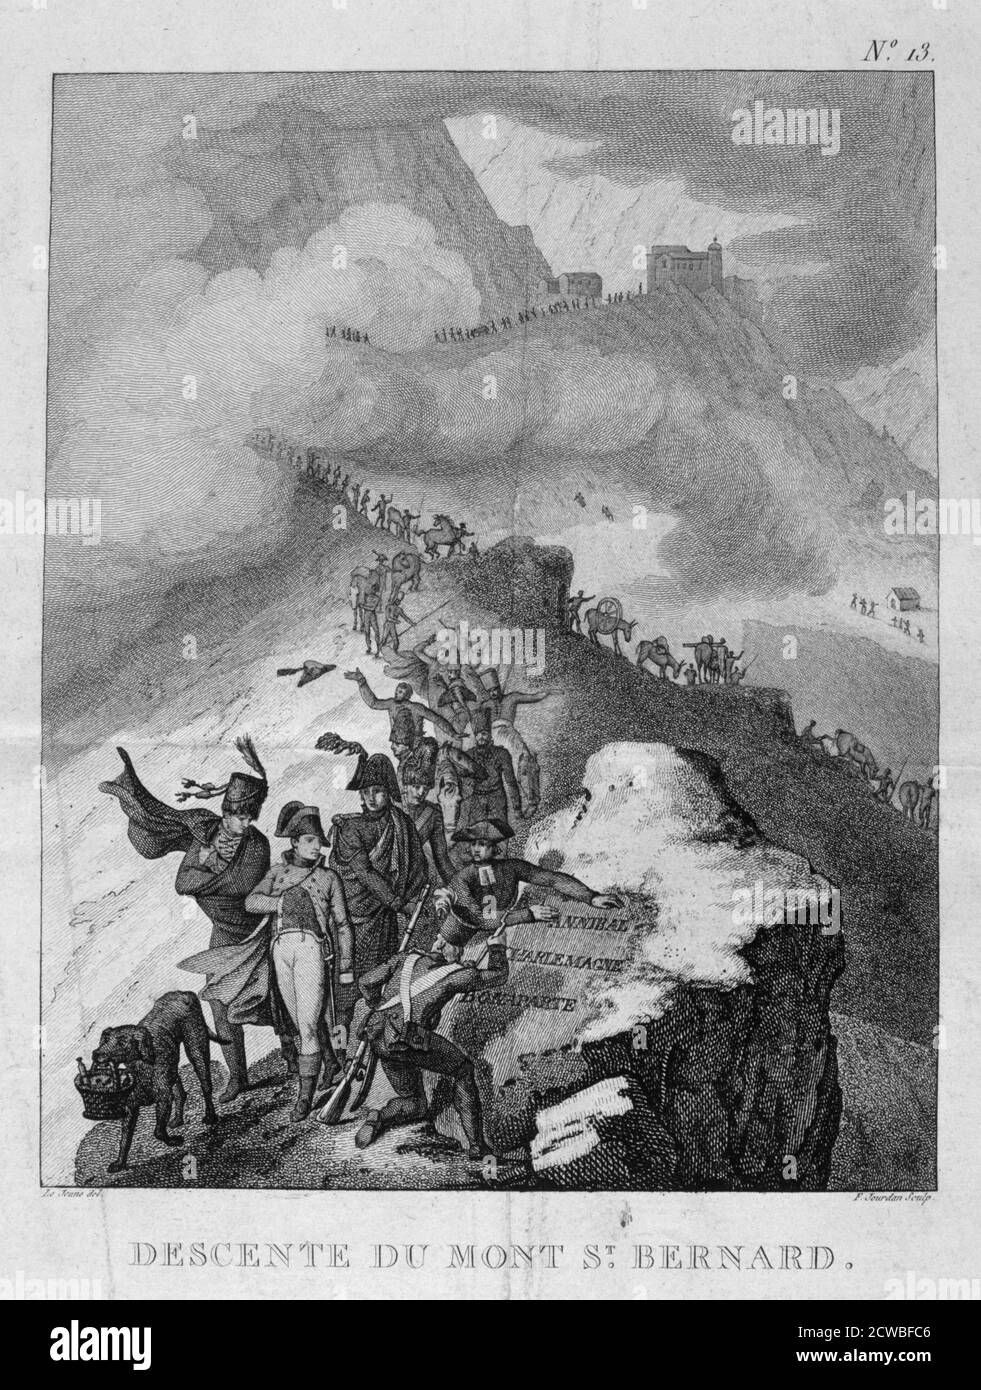 The descent of Mount St Bernard', 1800. After his appointment as First Consul and Austria's attack on Italy, Napoleon and his troops cross the Alps following in the footsteps of Hannibal and Charlemagne. Stock Photo